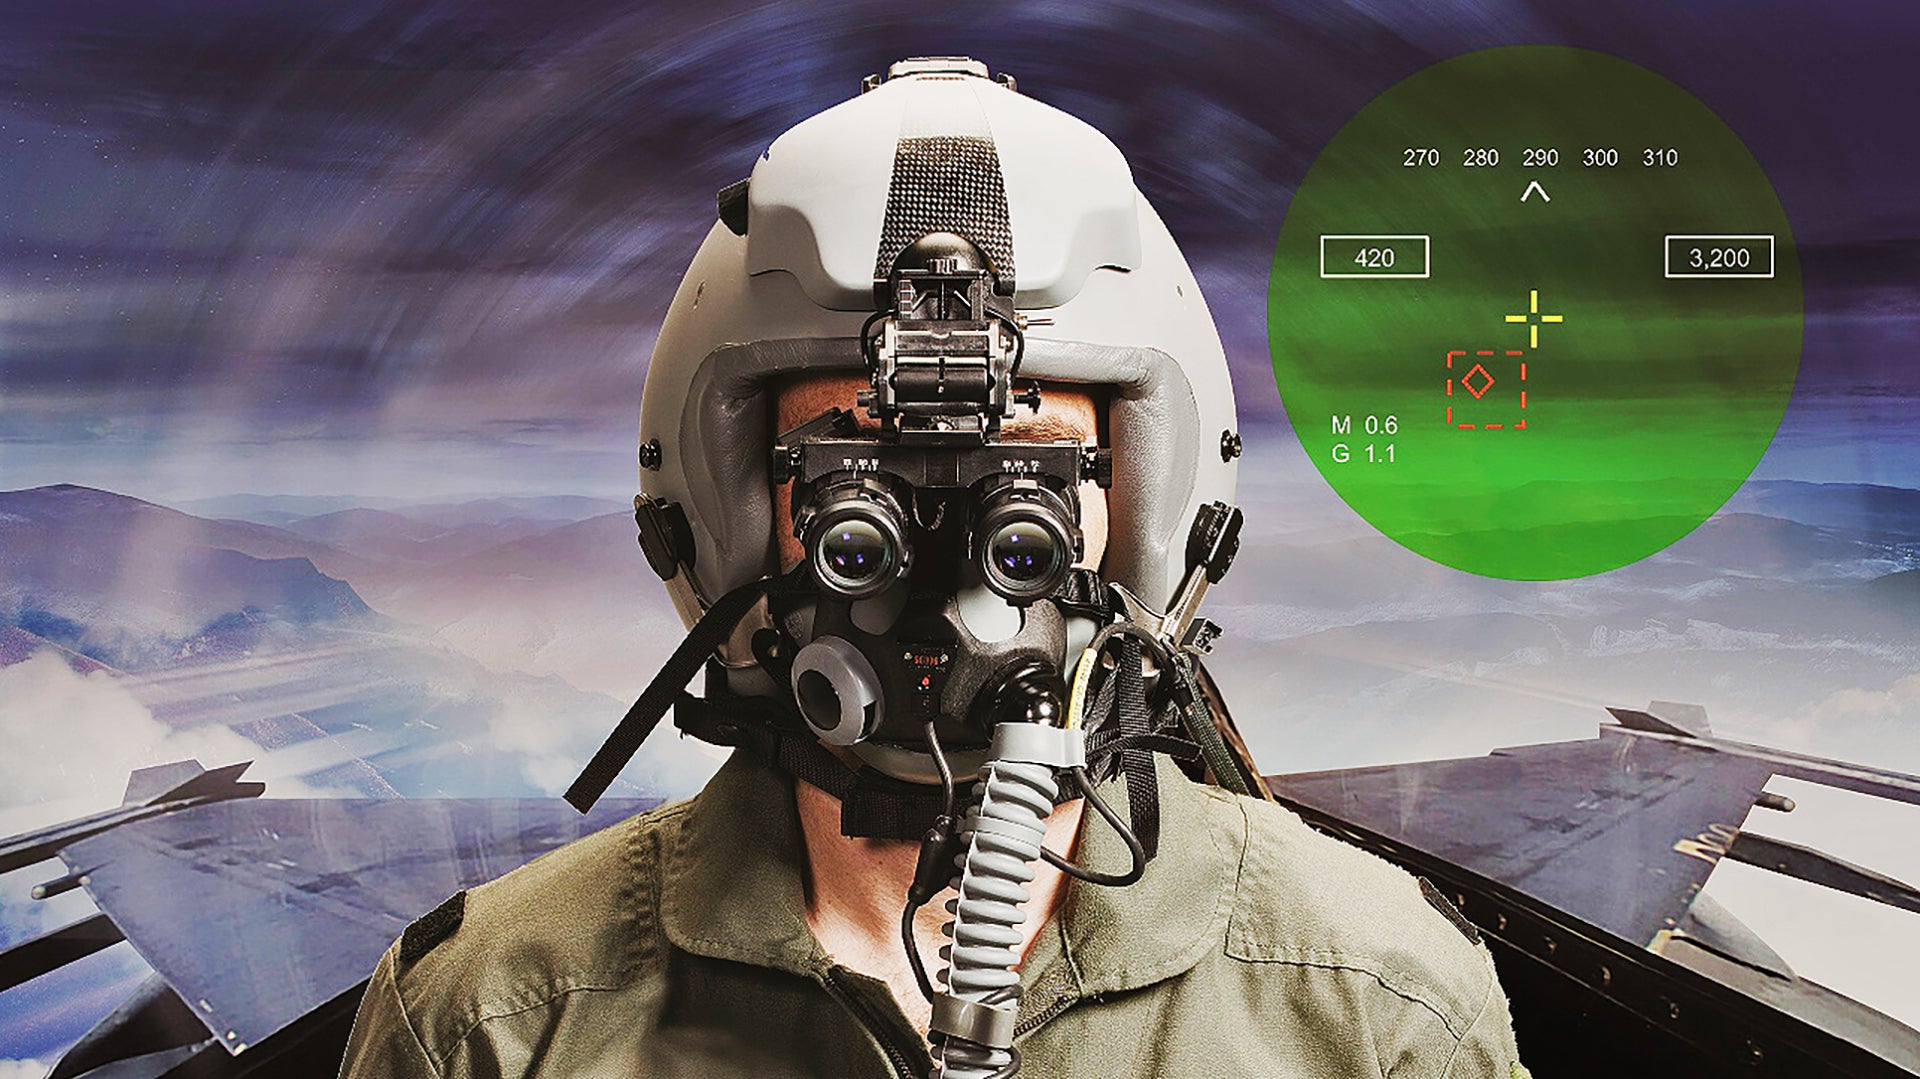 New “Digital Eye Piece” Will Allow U.S. Fighter Pilots To Own The Night Like Never Before